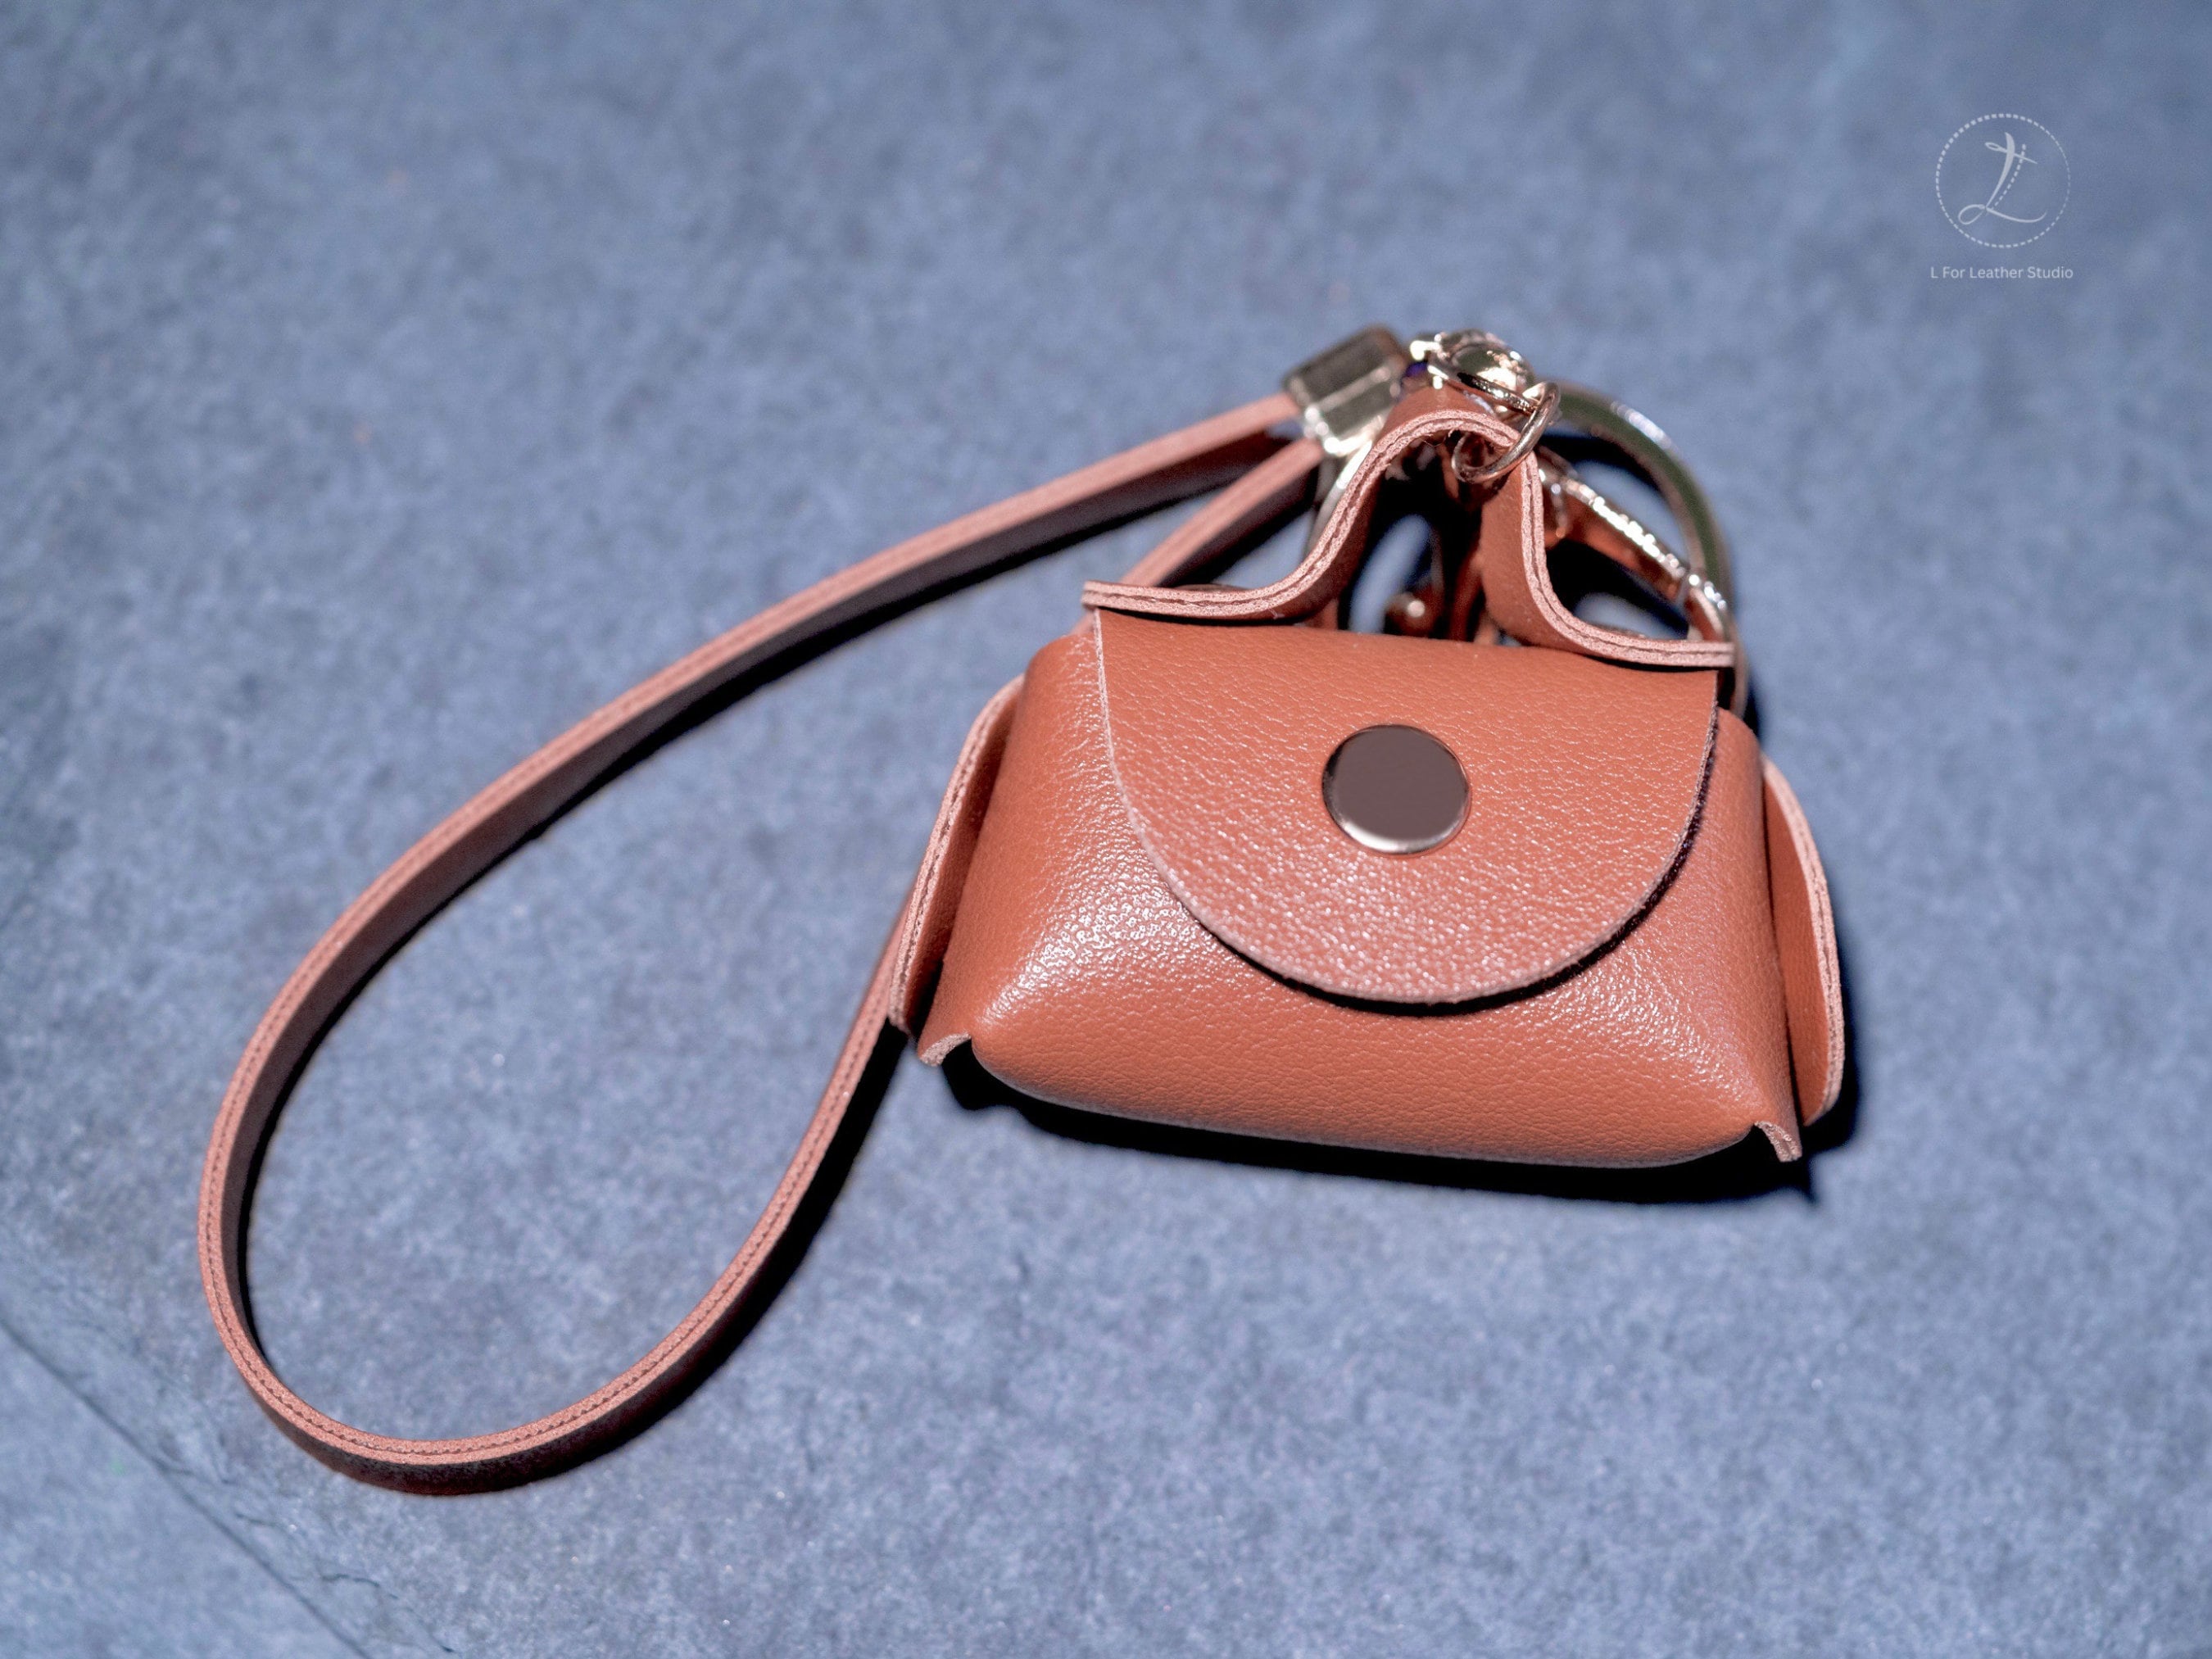 Mini Dumpling Vegan leather coin purse with strap, keyring and